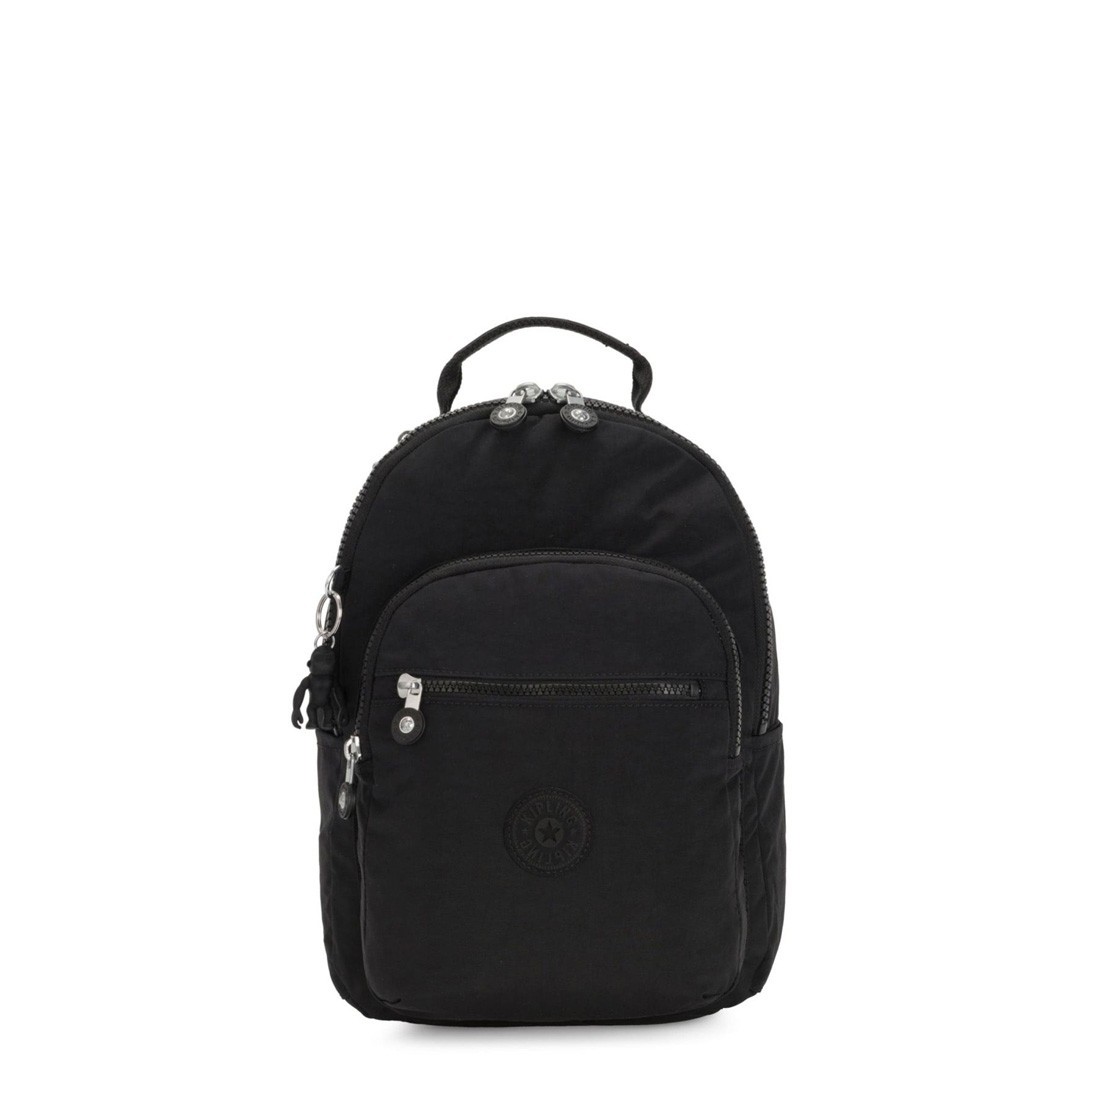 Shop Kipling Seoul S Small Backpack with Tablet Compartment - Black ...